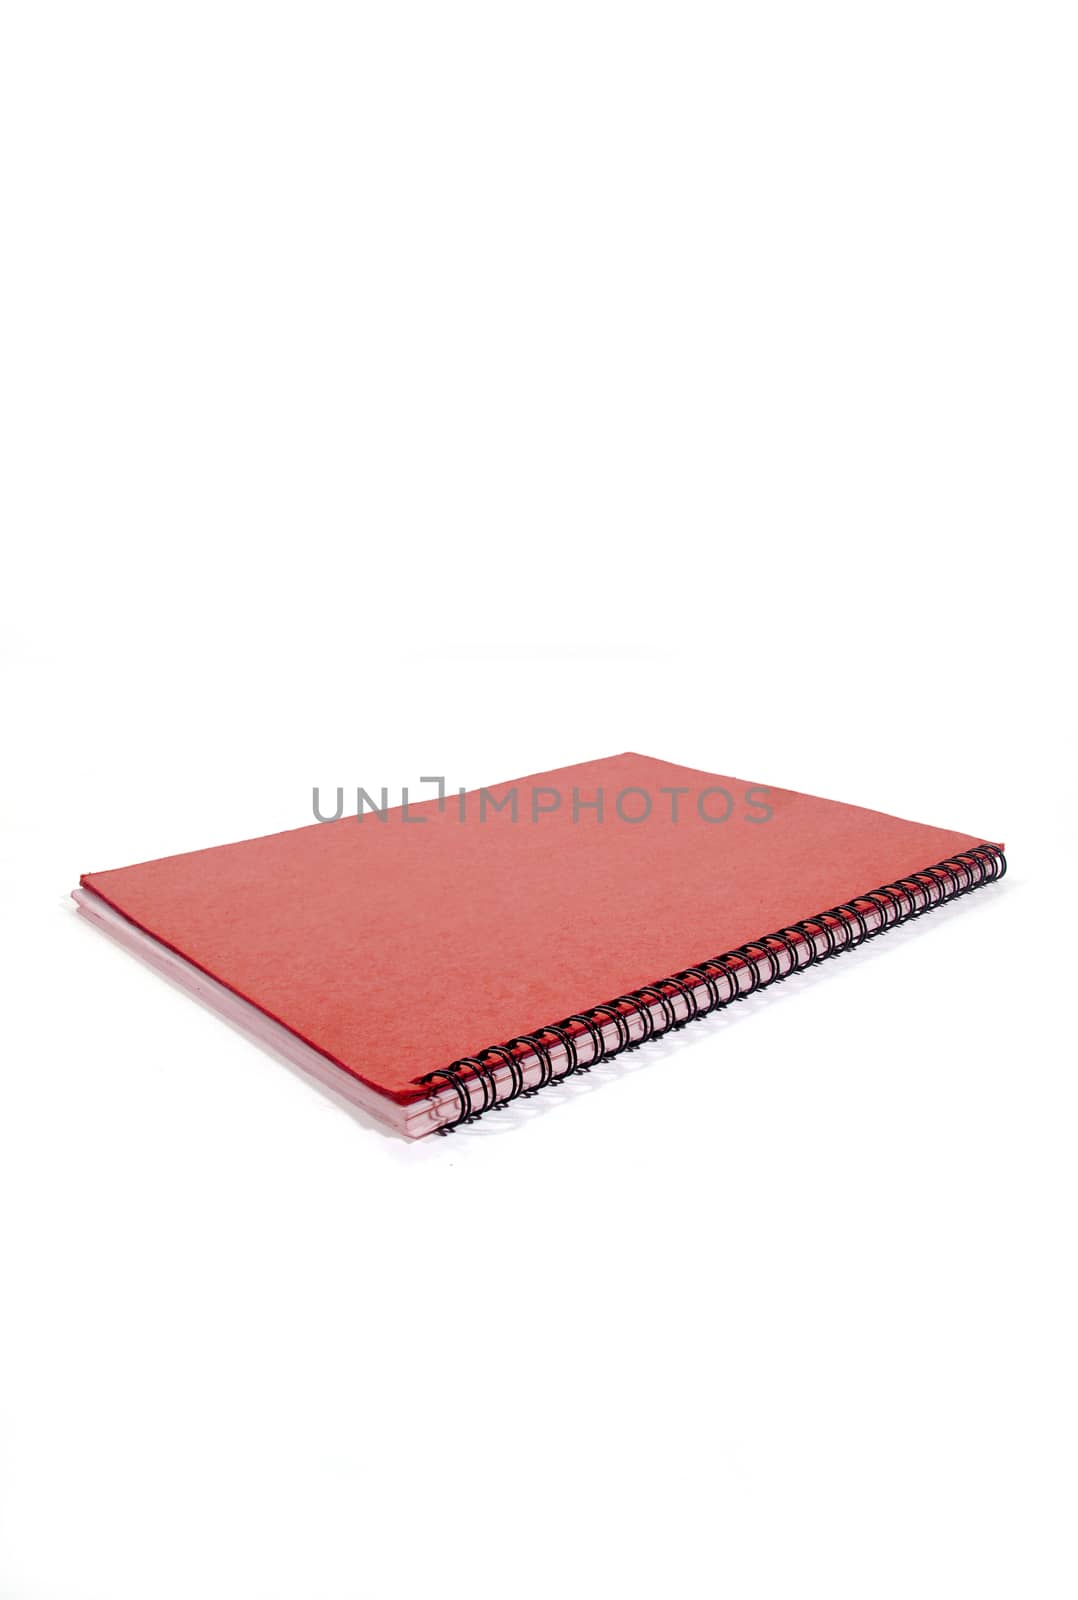 Wood cover notebook isolated on white background.(with Clipping Path).